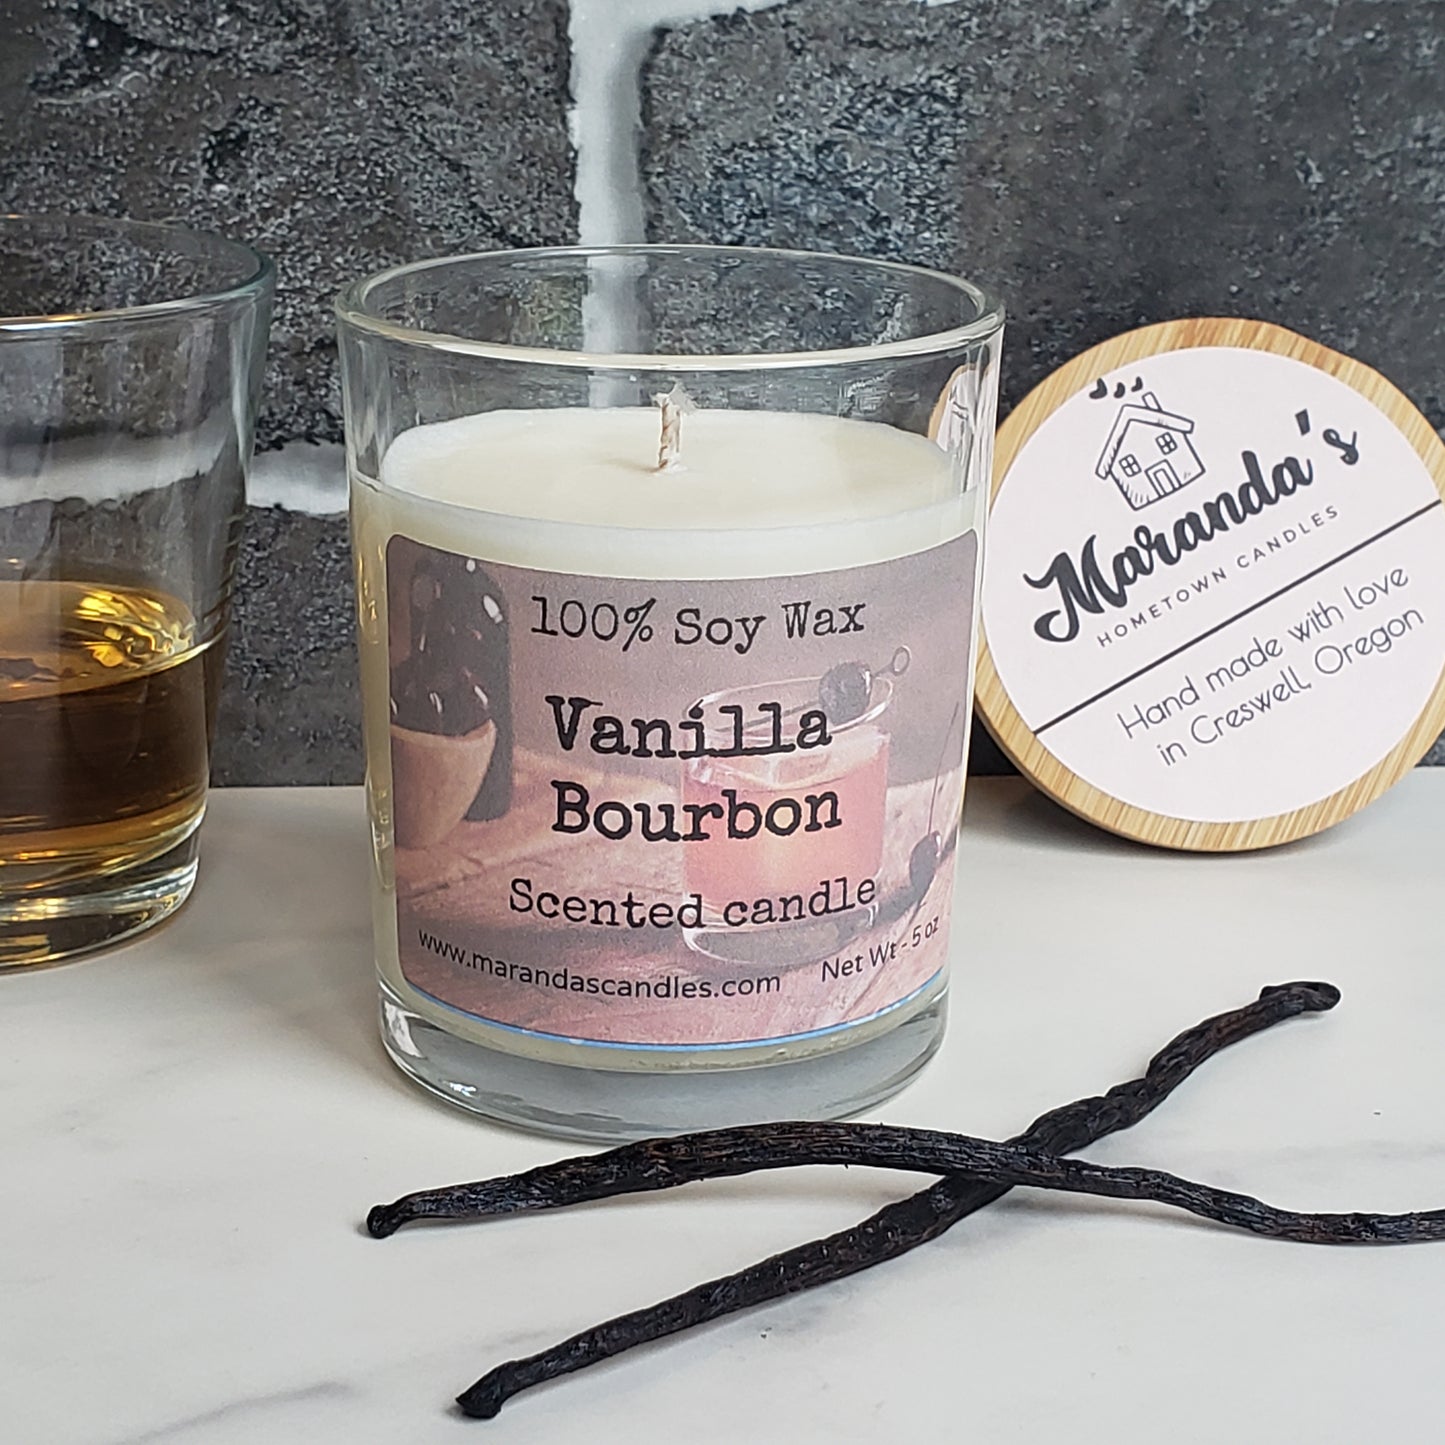 Vanilla Bourbon Scented Soy Wax Candle/Wax Melts